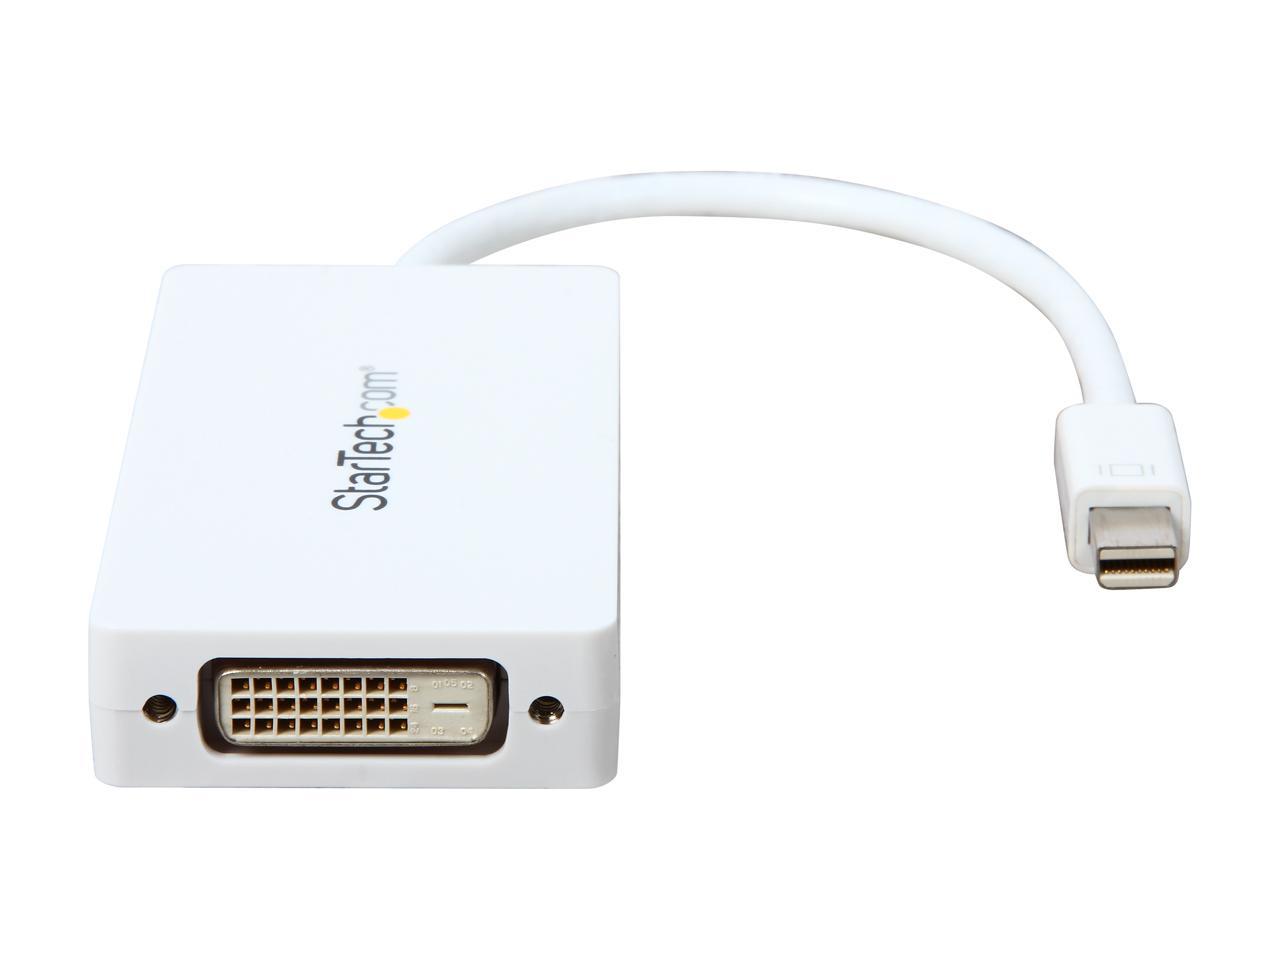 StarTech.com MDP2VGDVHDW Travel A/V Adapter: 3-in-1 Mini DisplayPort to VGA DVI or HDMI Converter - White - image 2 of 6